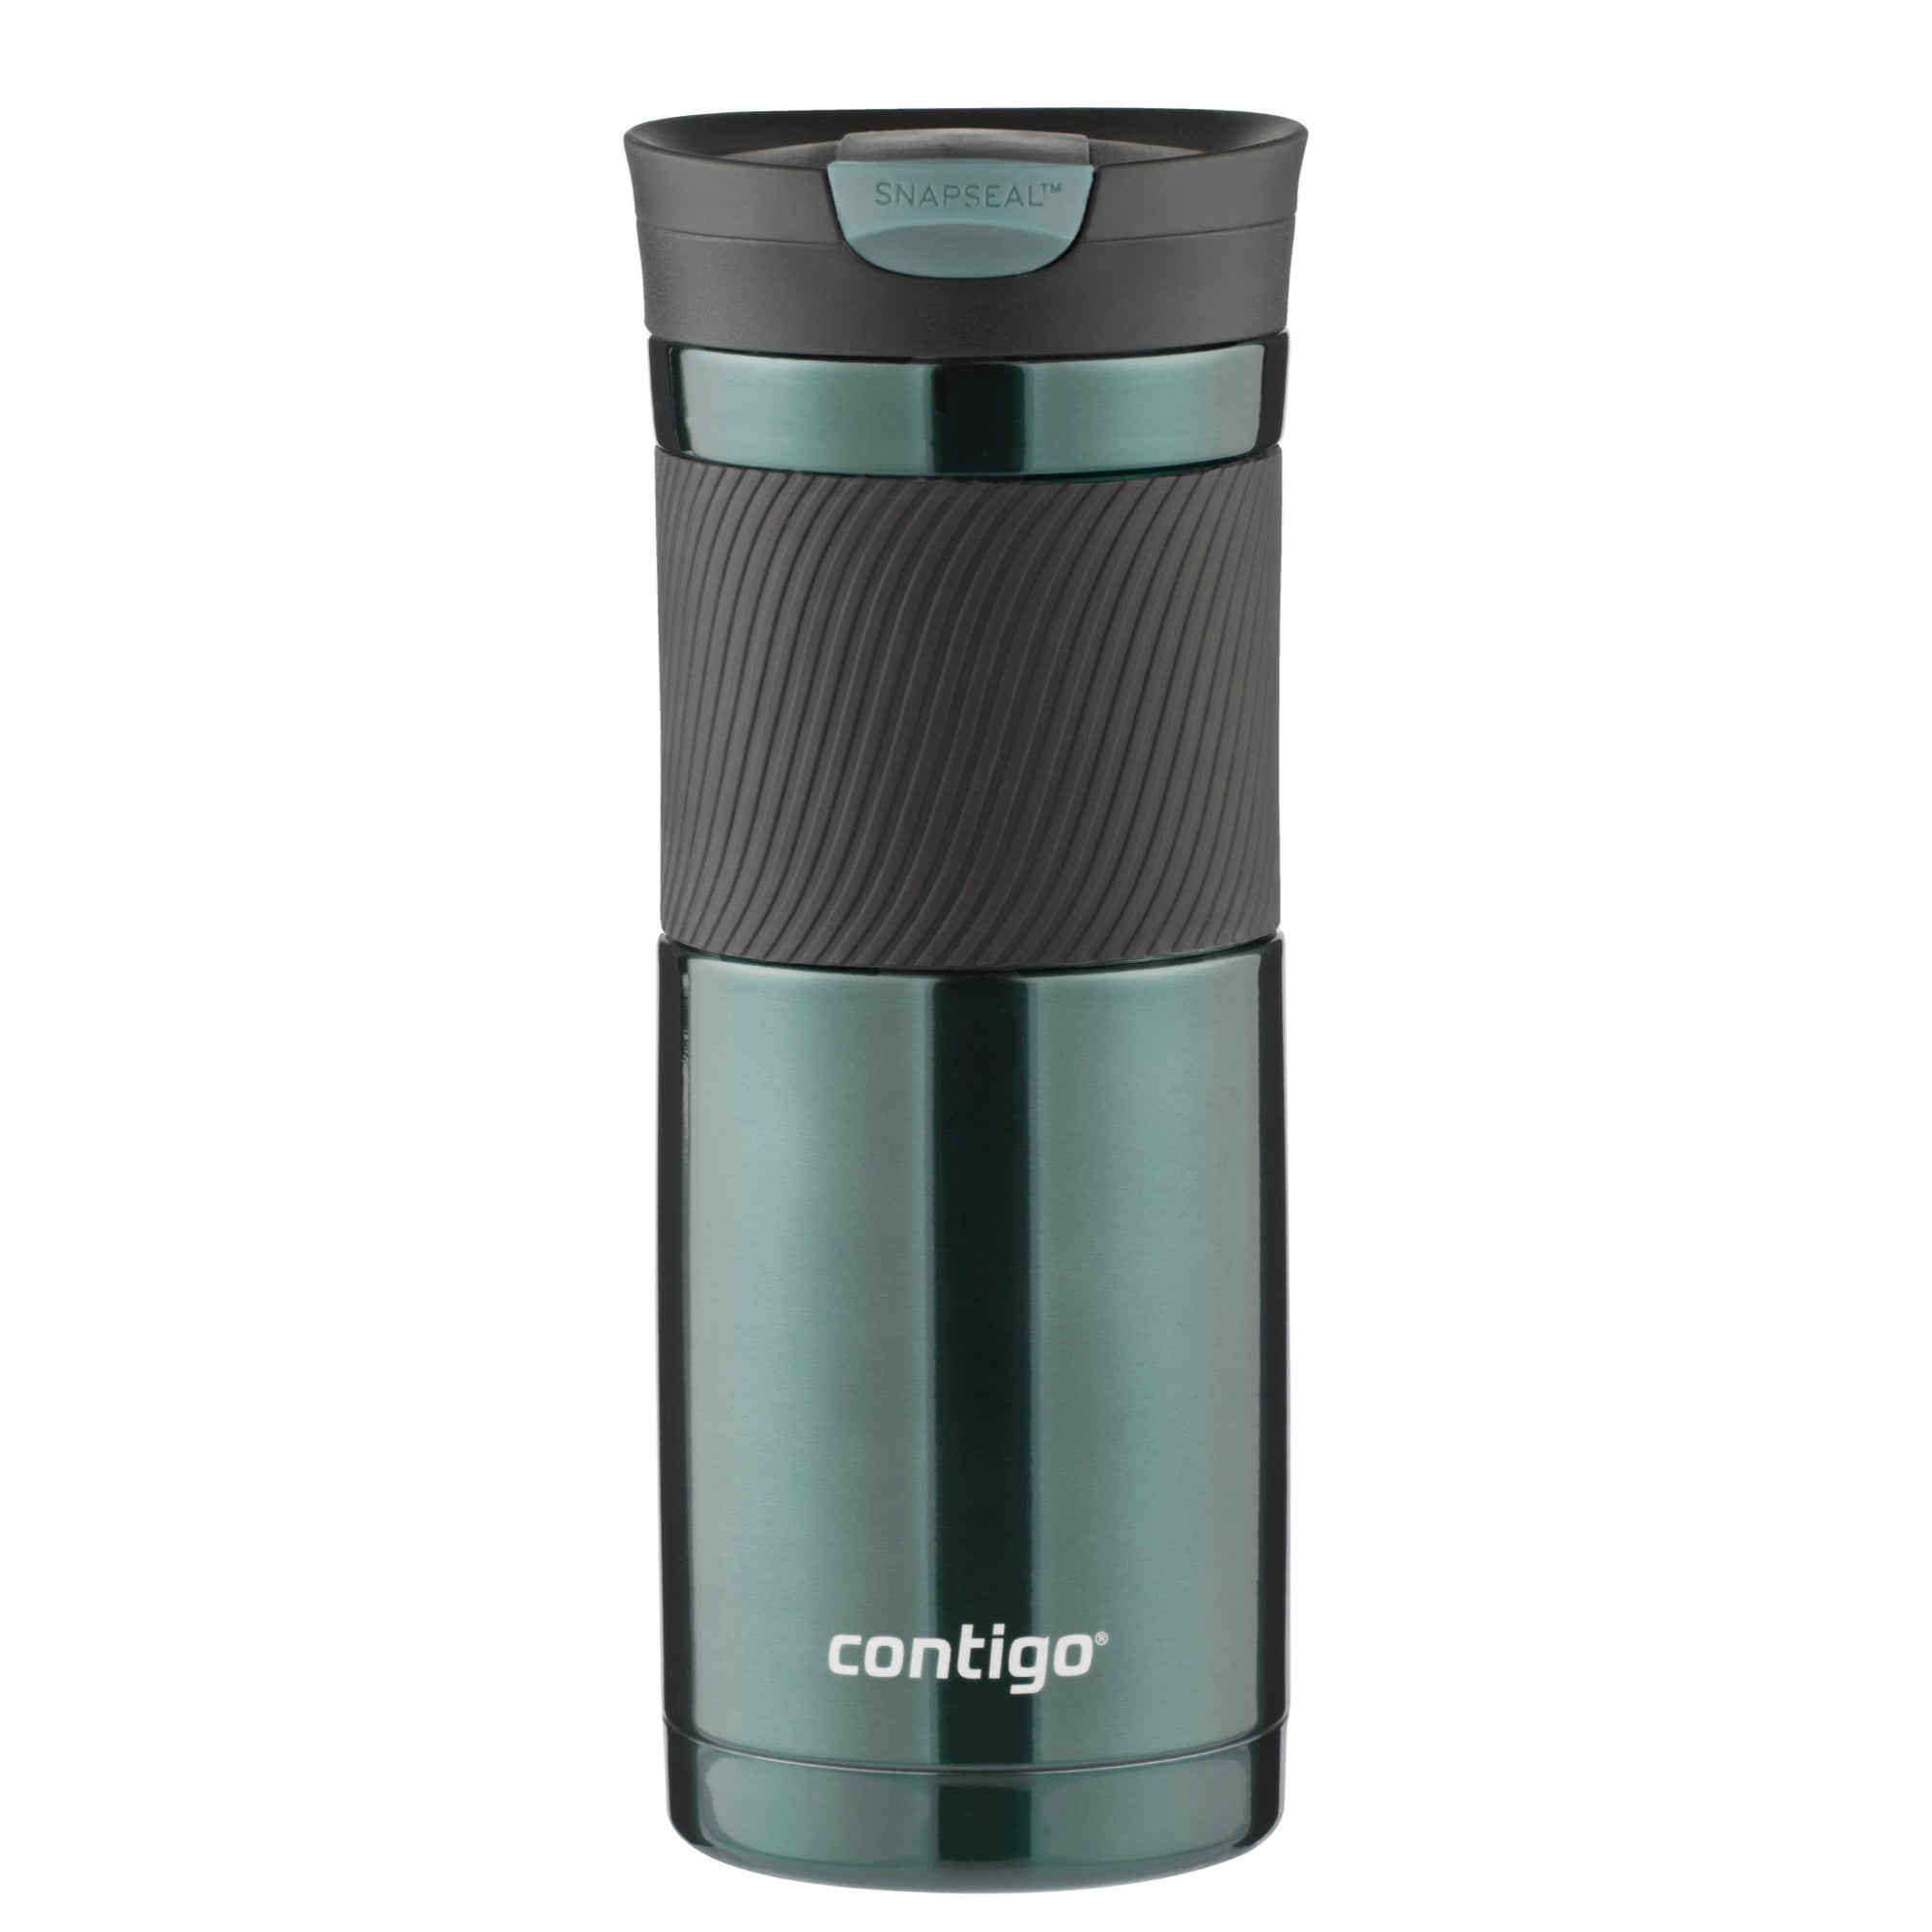 Contigo Byron Thermos Mug Cup Stainless Steel 470 Cold And Hot Drink Holder  Snapseal Vacuum Flask One Hand Lift Inner Gray Blue Red Black Navy Pink  2023 Unisex Kitchen Camping 6-12 Hours Protection